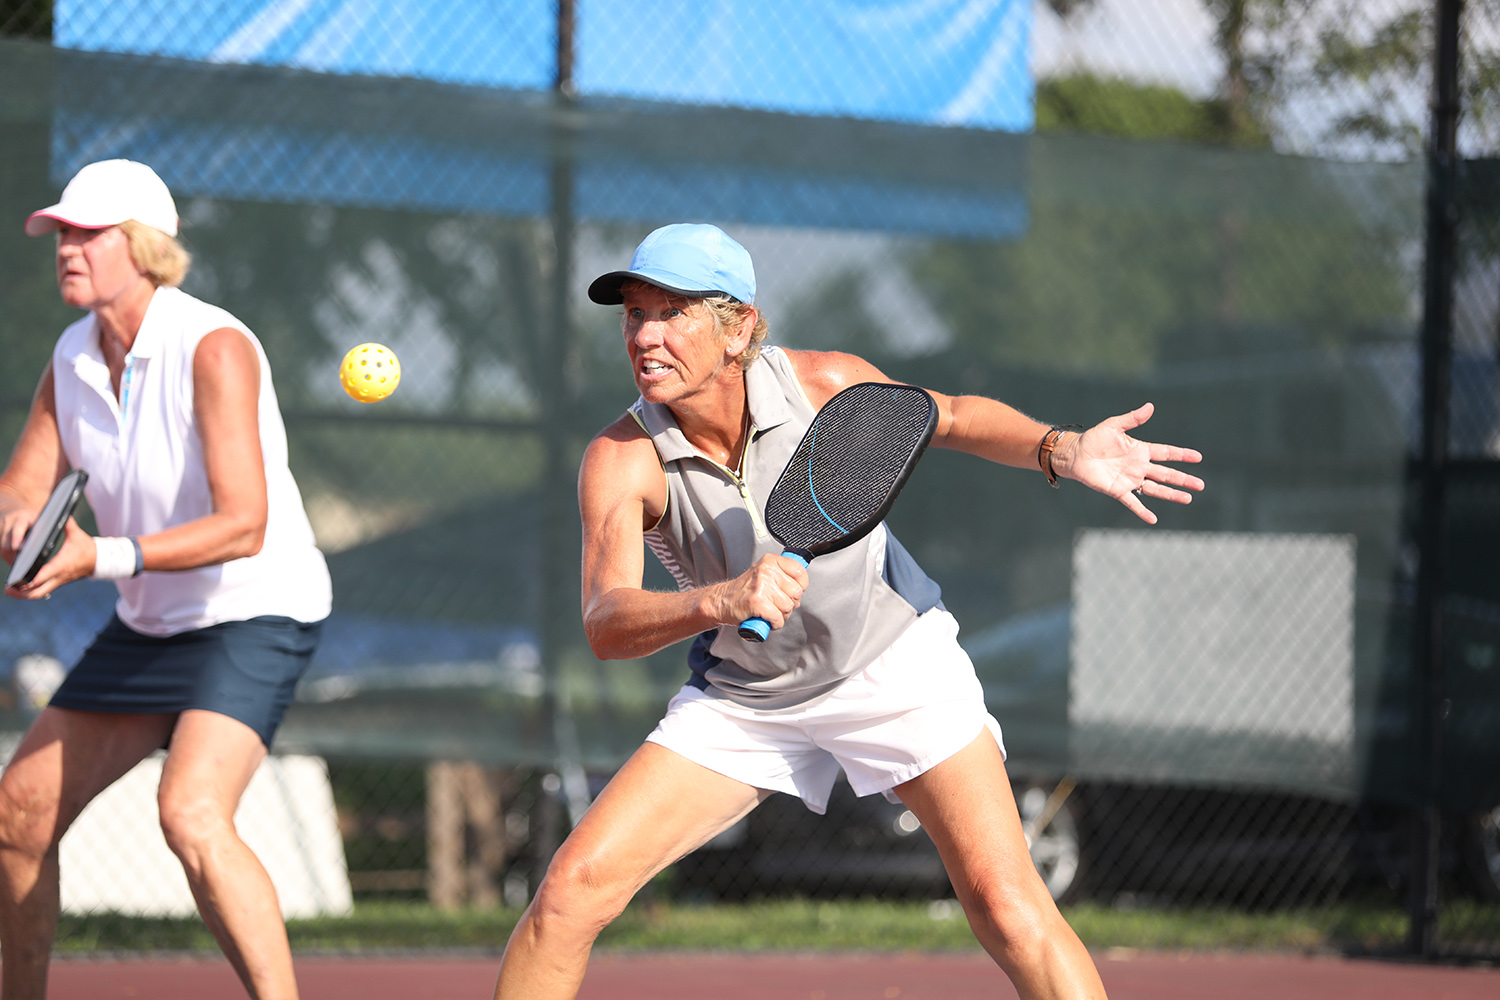 Women playing doubles pickleball